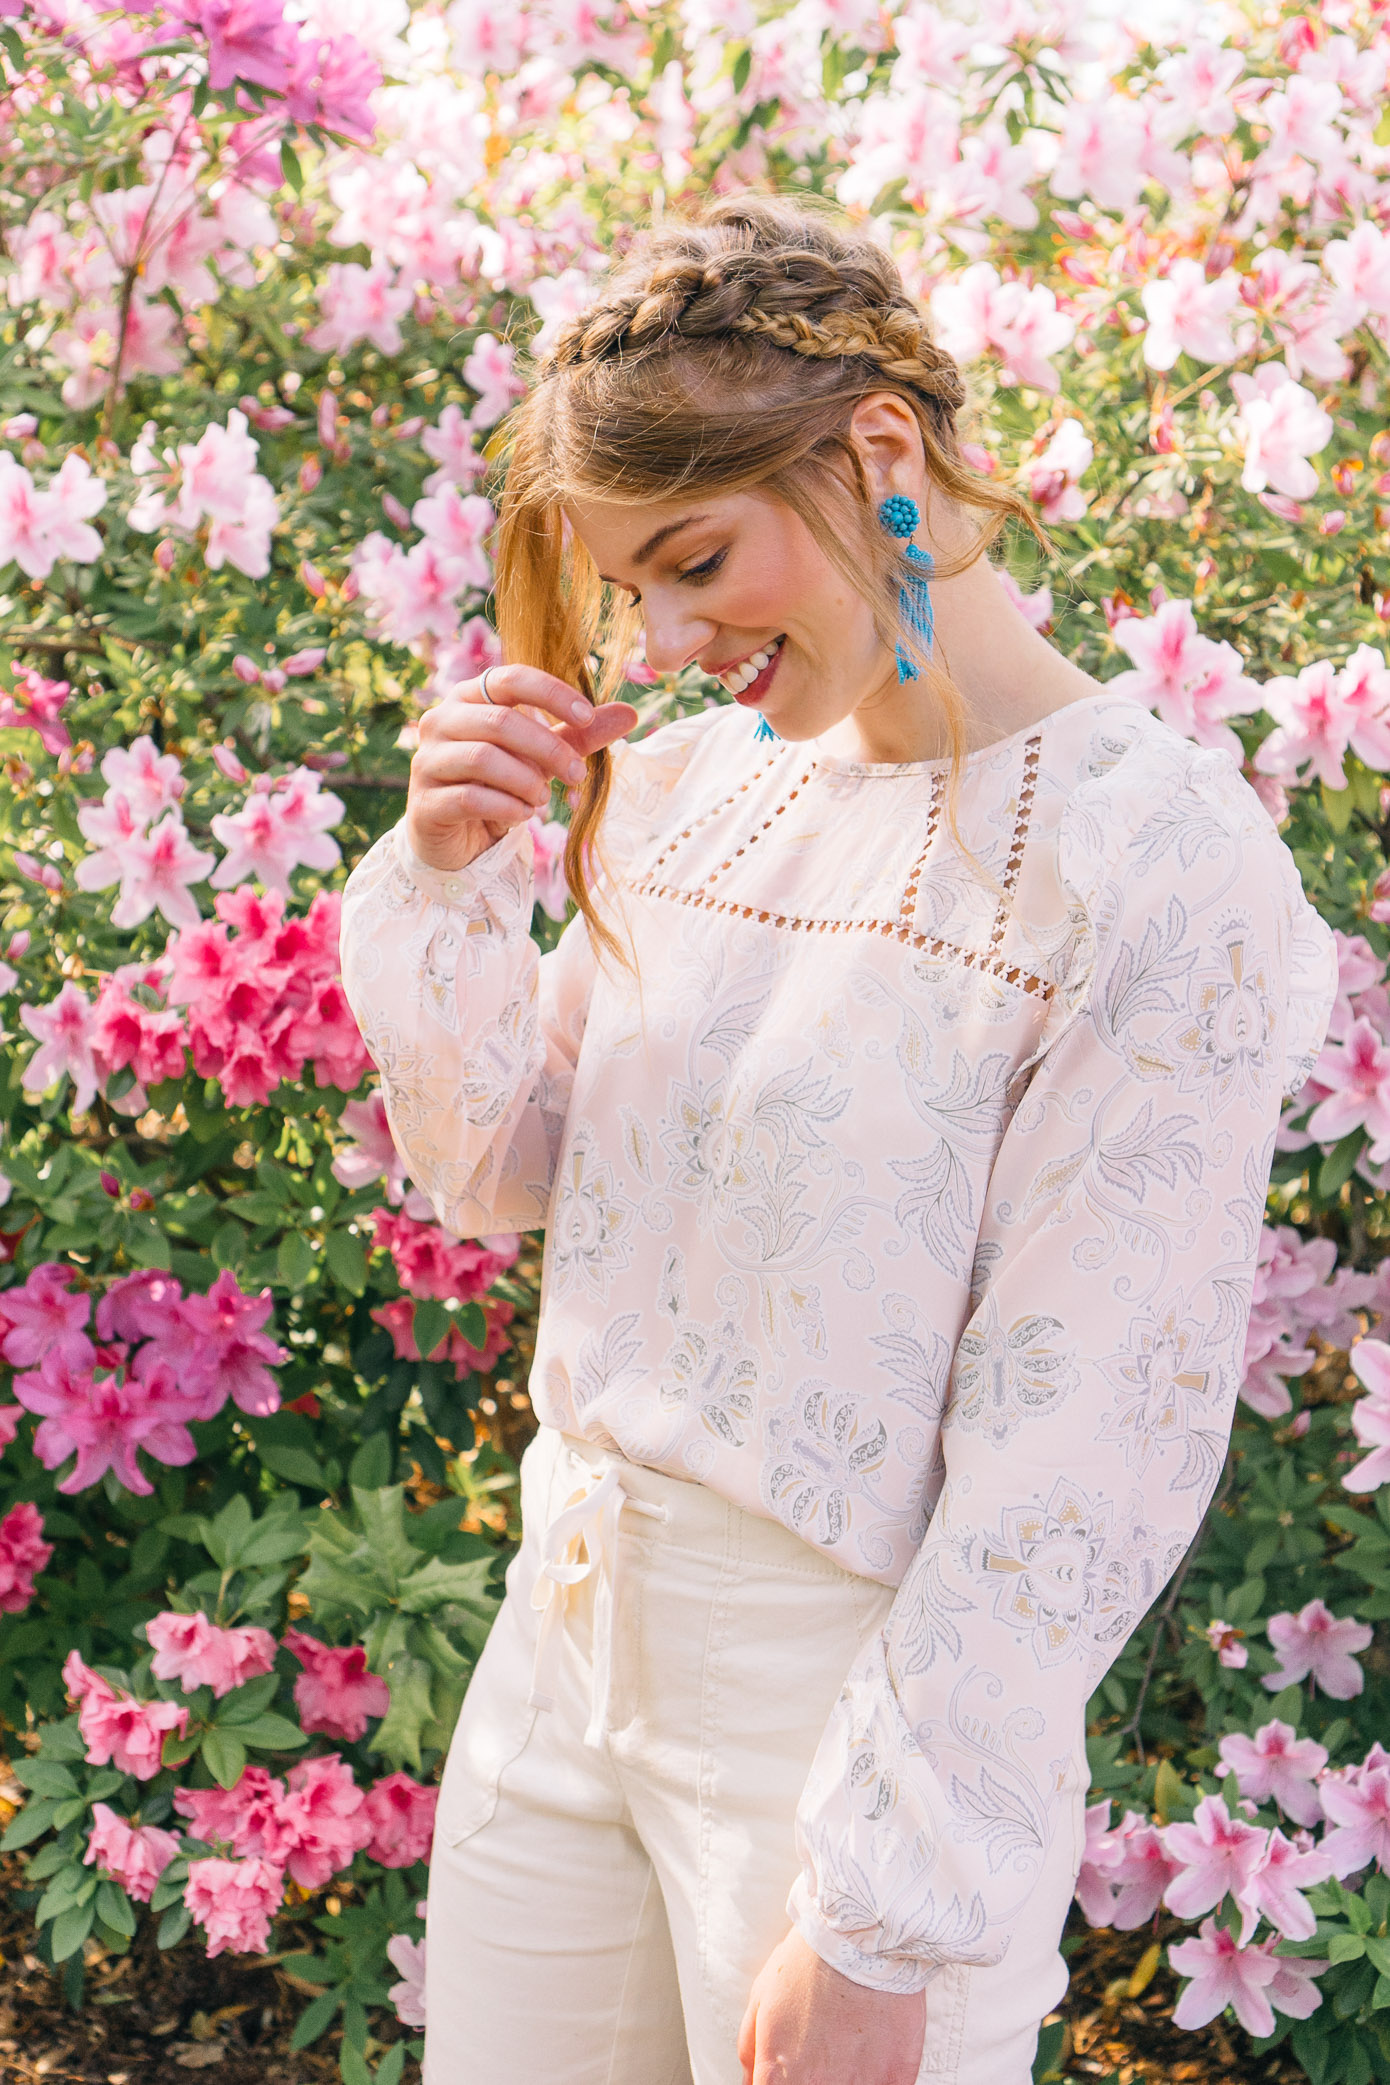 Feminine Floral Blouse, Perfect Linen Pants for Spring, Milkmaid Braid | Louella Reese Life & Style Blog